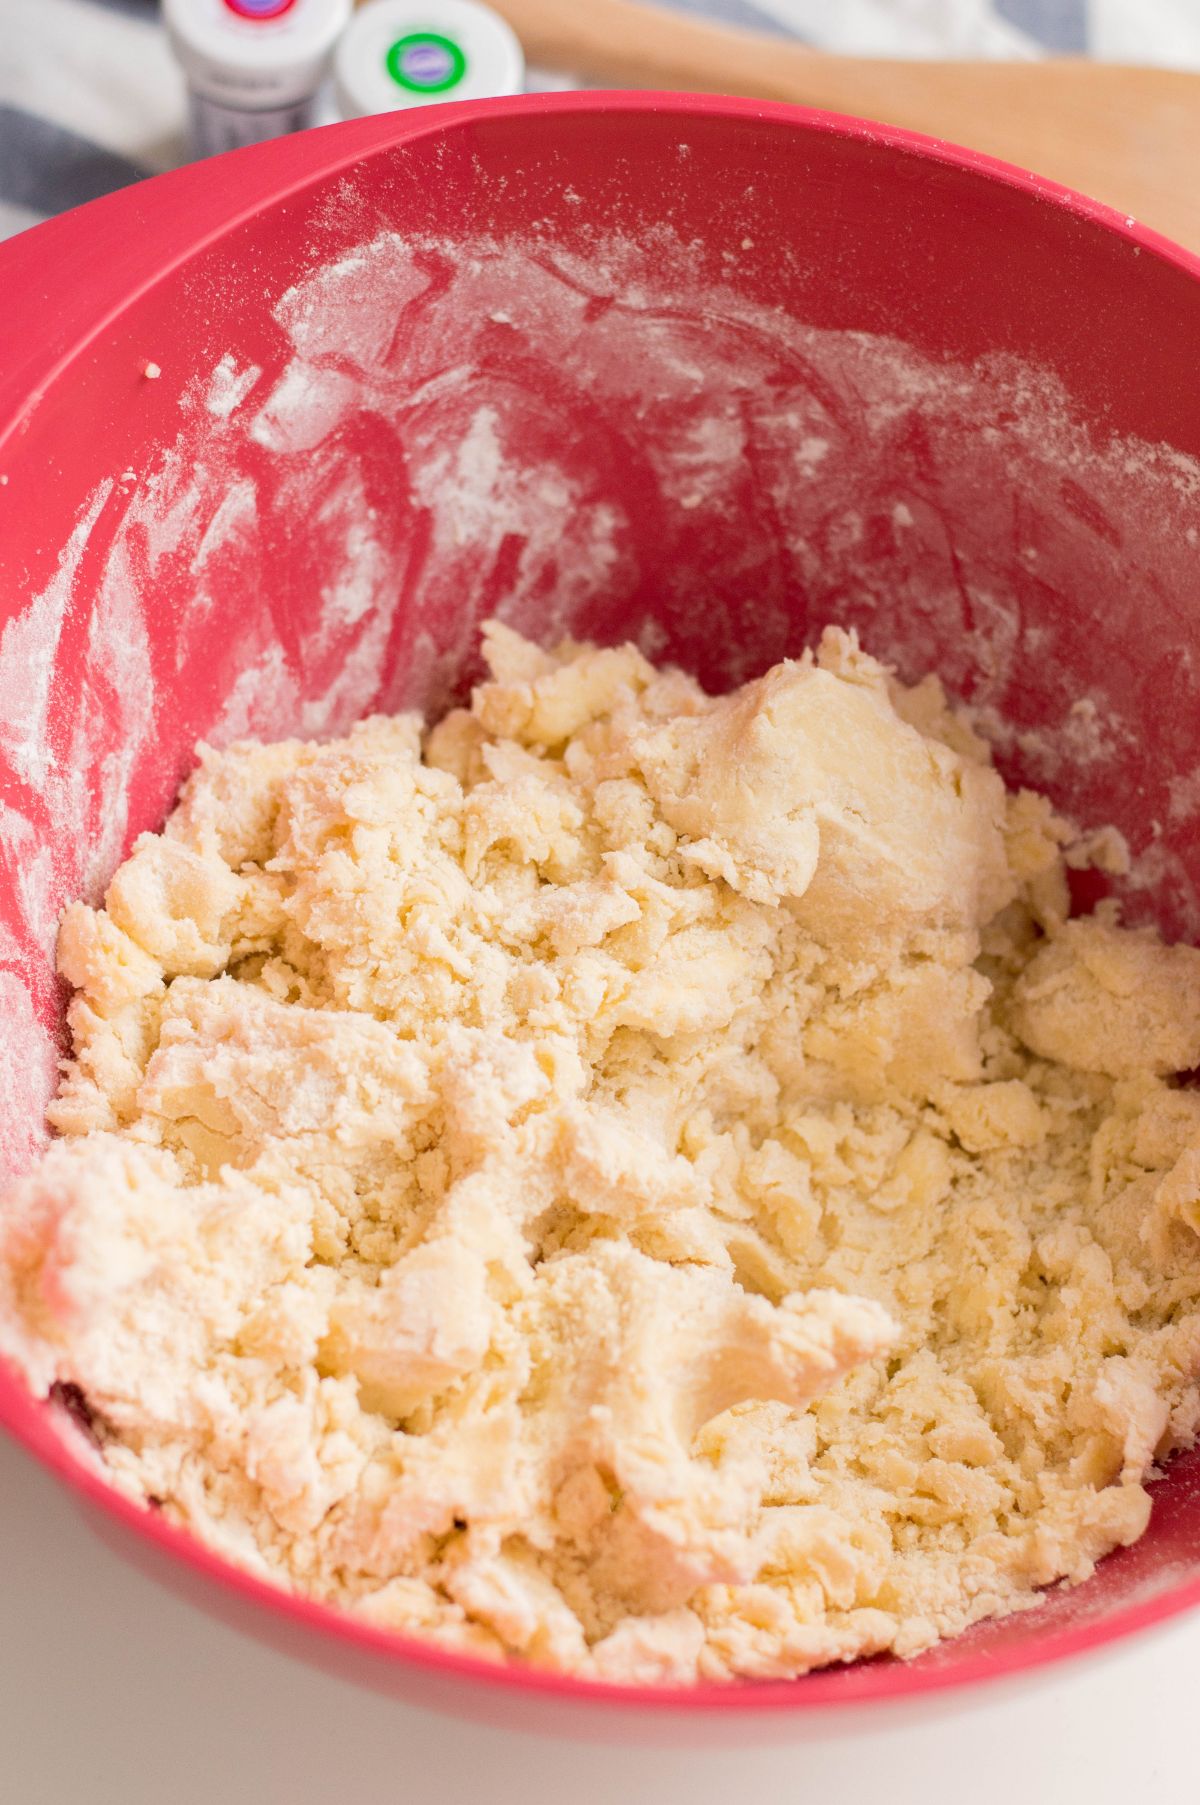 Creamed butter and sugar in a red mixing bowl with eggs, vanilla, and some ingredients added to it.